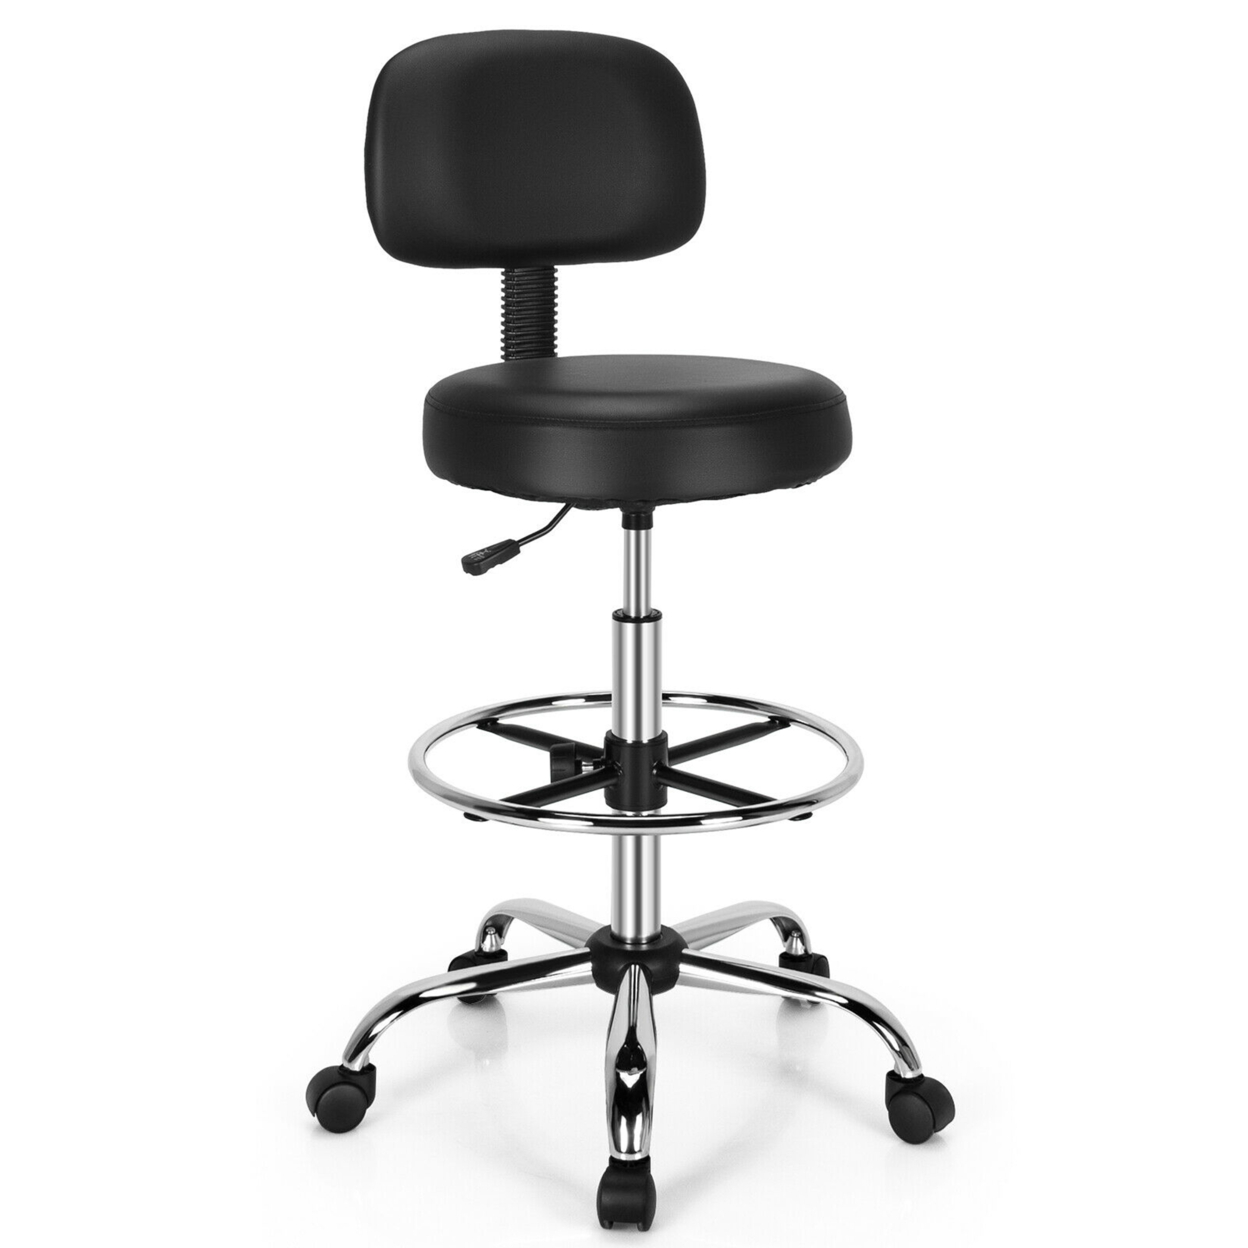 Swivel Drafting Chair Tall Office Chair W/ Adjustable Backrest Foot Ring